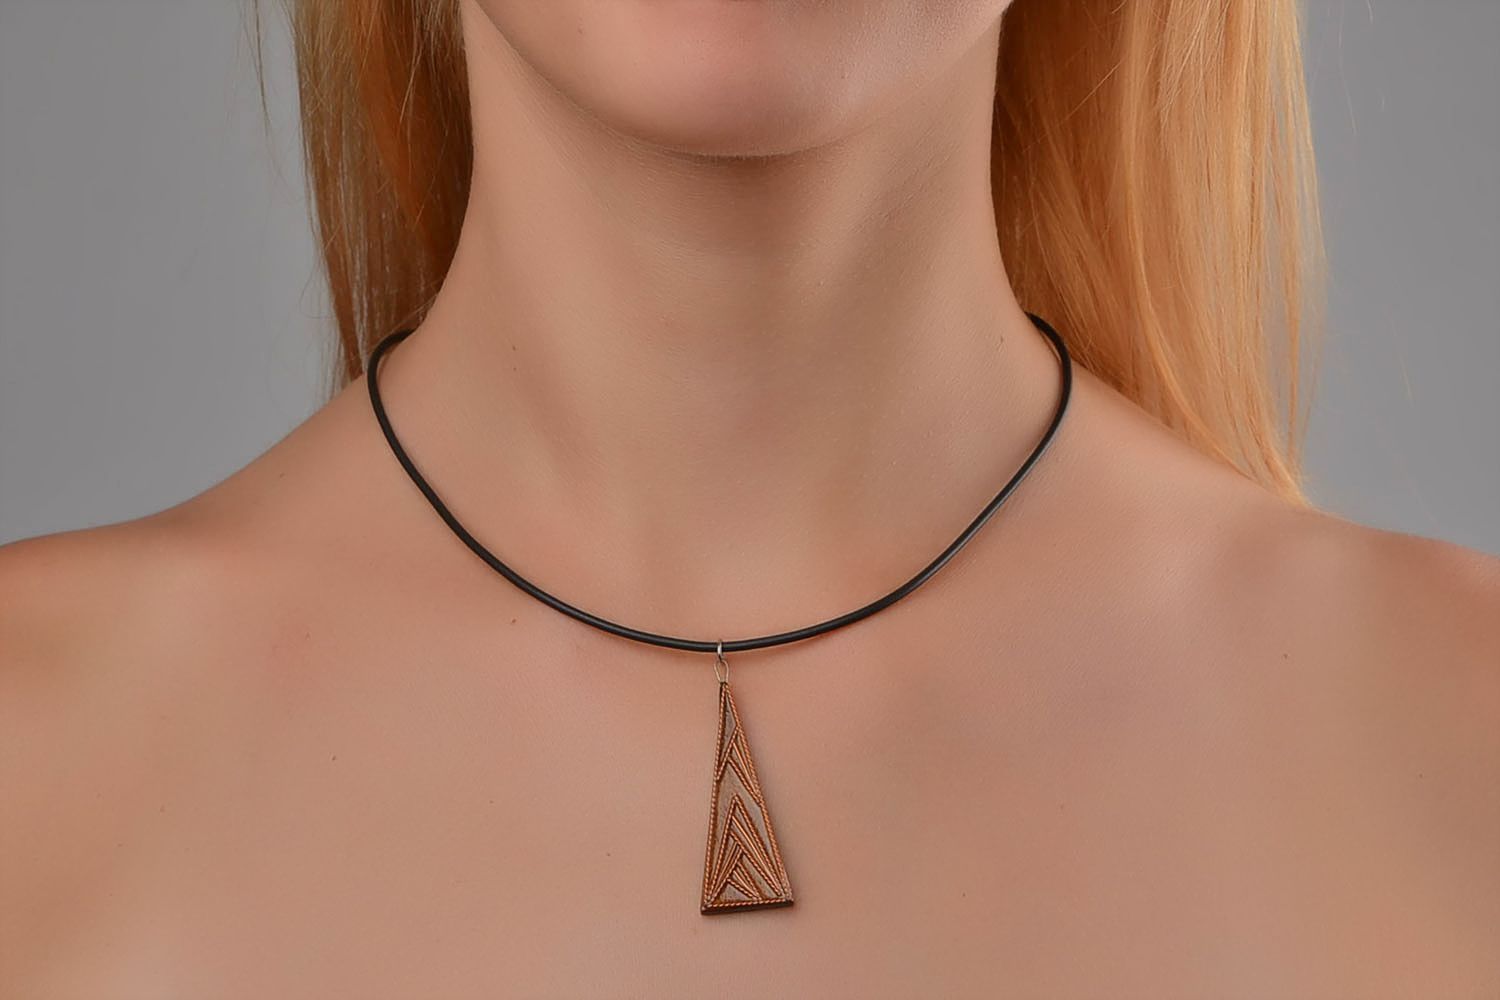 Unusual handmade wooden neck pendant copper inlay fashion accessories for girls photo 1